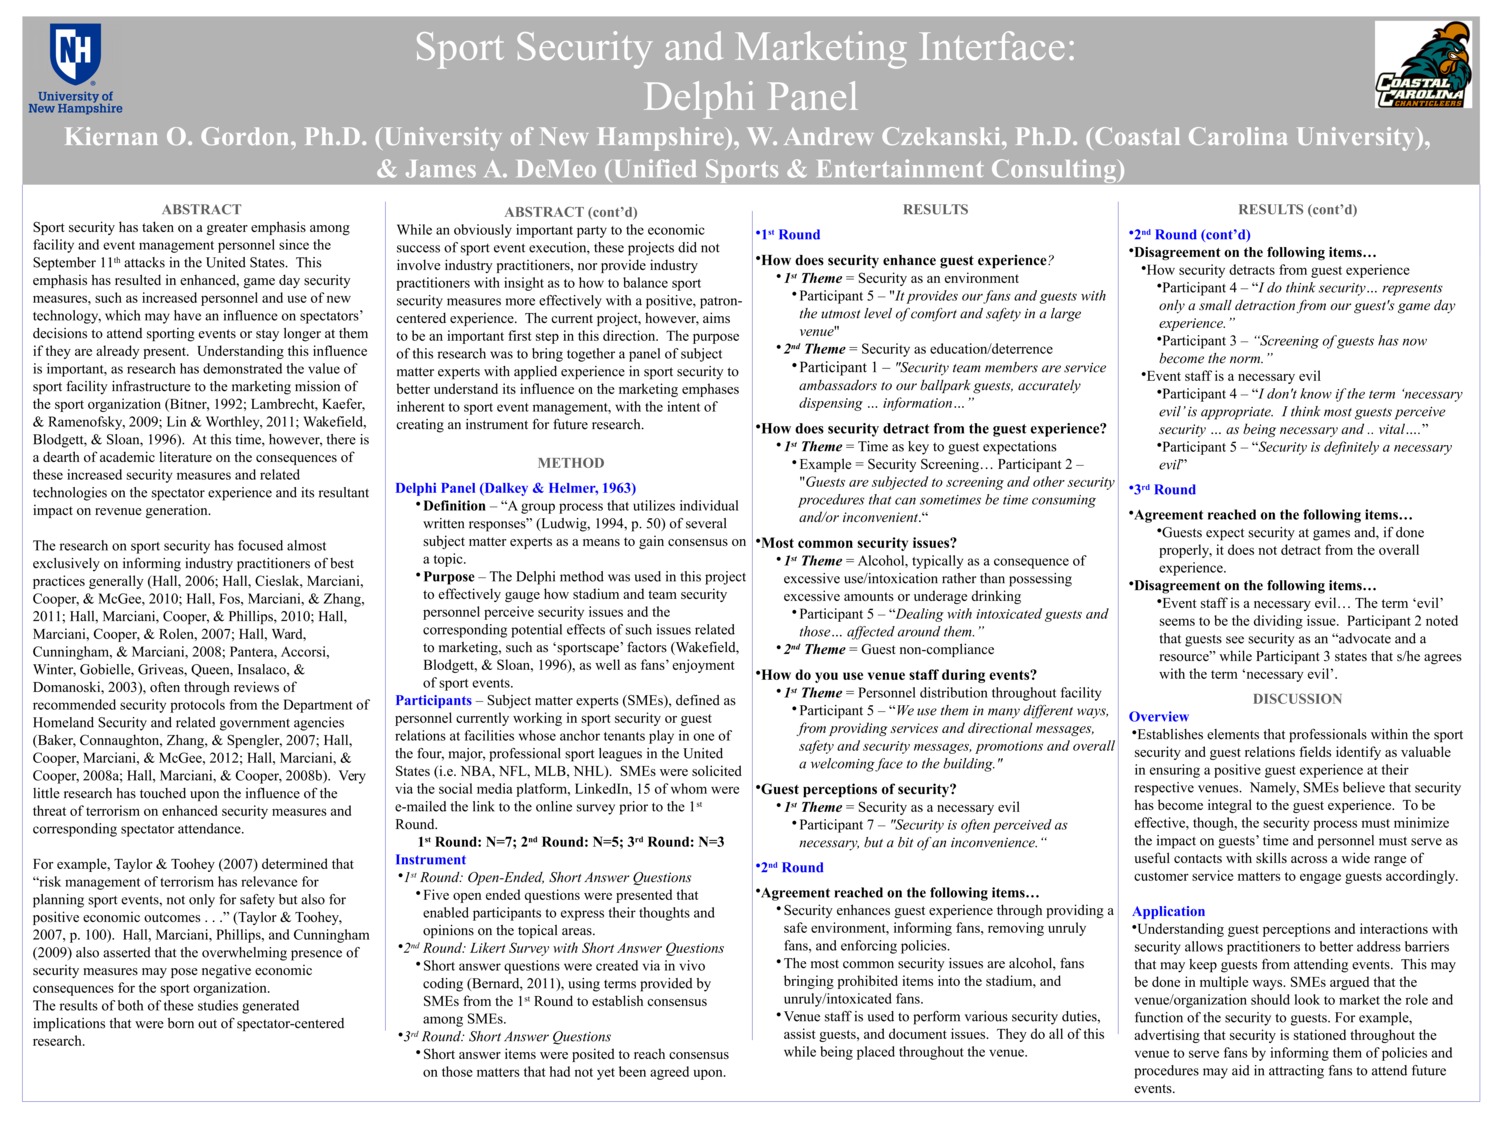 Sport Security And Marketing Interface: Delphi Panel by kog2003